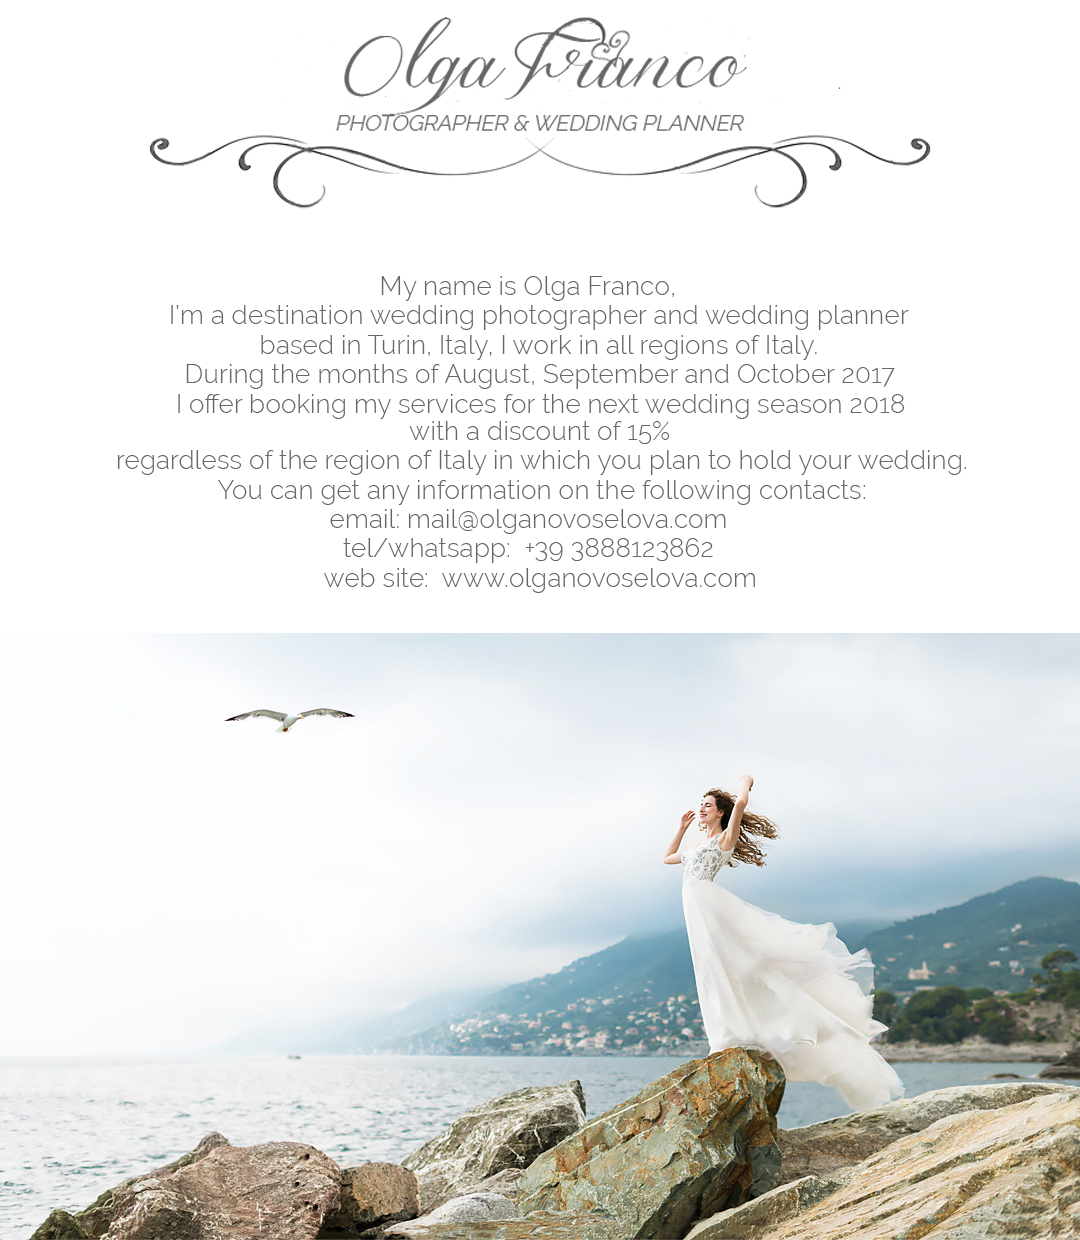 discounts-on-booking-wedding-photographer-services-in-italy-2018